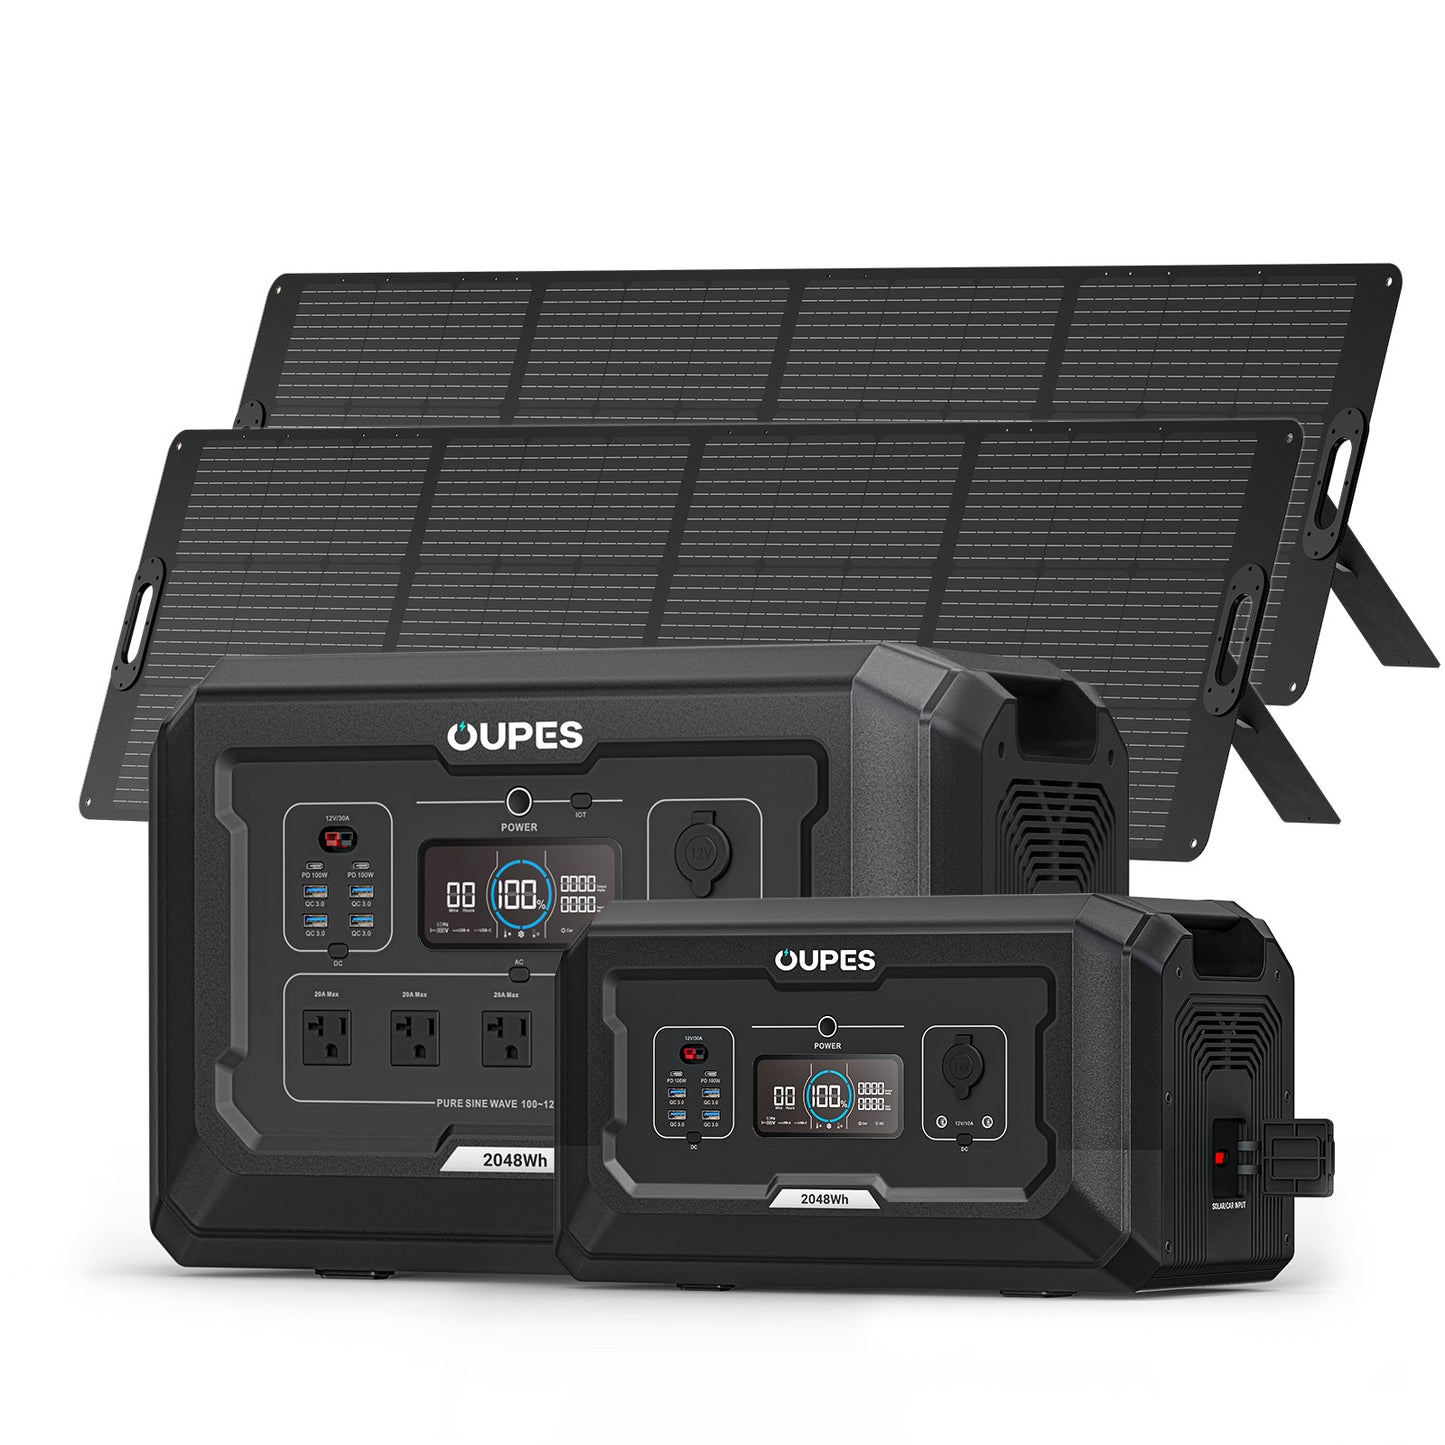 OUPES Mega 2 Power Station | 2500W, 2048Wh, Fast Charge